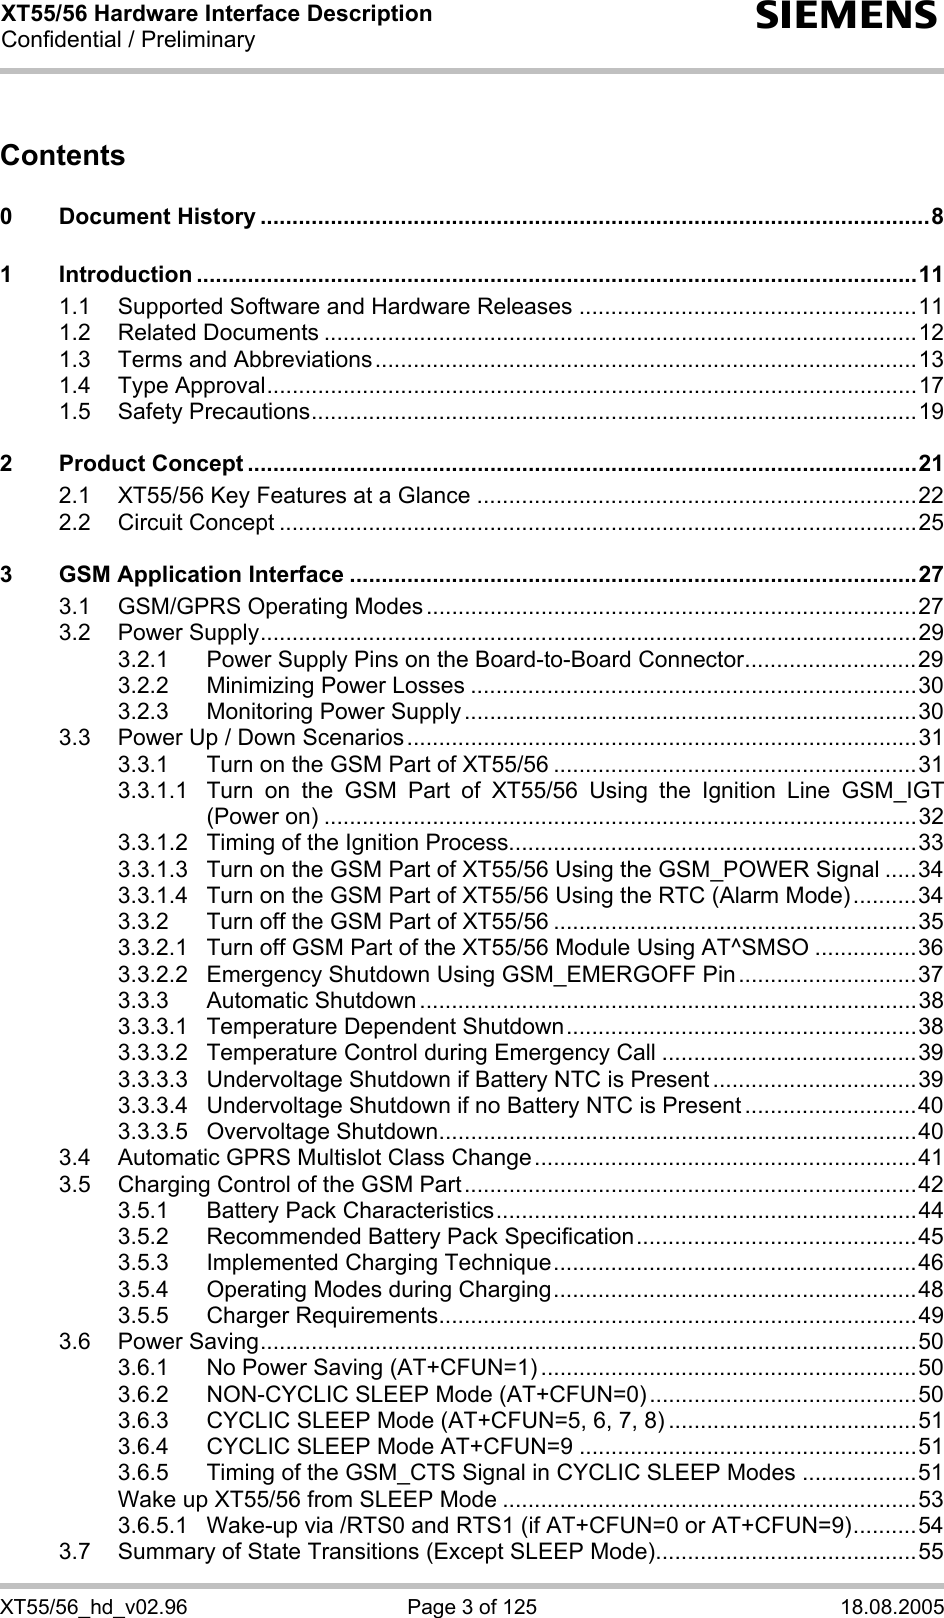 XT55/56 Hardware Interface Description Confidential / Preliminary s XT55/56_hd_v02.96  Page 3 of 125  18.08.2005 Contents  0 Document History .........................................................................................................8 1 Introduction .................................................................................................................11 1.1 Supported Software and Hardware Releases .....................................................11 1.2 Related Documents .............................................................................................12 1.3 Terms and Abbreviations.....................................................................................13 1.4 Type Approval......................................................................................................17 1.5 Safety Precautions...............................................................................................19 2 Product Concept .........................................................................................................21 2.1 XT55/56 Key Features at a Glance .....................................................................22 2.2 Circuit Concept ....................................................................................................25 3 GSM Application Interface .........................................................................................27 3.1 GSM/GPRS Operating Modes.............................................................................27 3.2 Power Supply.......................................................................................................29 3.2.1 Power Supply Pins on the Board-to-Board Connector...........................29 3.2.2 Minimizing Power Losses ......................................................................30 3.2.3 Monitoring Power Supply .......................................................................30 3.3 Power Up / Down Scenarios................................................................................31 3.3.1 Turn on the GSM Part of XT55/56 .........................................................31 3.3.1.1 Turn on the GSM Part of XT55/56 Using the Ignition Line GSM_IGT (Power on) .............................................................................................32 3.3.1.2 Timing of the Ignition Process................................................................33 3.3.1.3 Turn on the GSM Part of XT55/56 Using the GSM_POWER Signal .....34 3.3.1.4 Turn on the GSM Part of XT55/56 Using the RTC (Alarm Mode)..........34 3.3.2 Turn off the GSM Part of XT55/56 .........................................................35 3.3.2.1 Turn off GSM Part of the XT55/56 Module Using AT^SMSO ................36 3.3.2.2 Emergency Shutdown Using GSM_EMERGOFF Pin............................37 3.3.3 Automatic Shutdown ..............................................................................38 3.3.3.1 Temperature Dependent Shutdown.......................................................38 3.3.3.2 Temperature Control during Emergency Call ........................................39 3.3.3.3 Undervoltage Shutdown if Battery NTC is Present ................................39 3.3.3.4 Undervoltage Shutdown if no Battery NTC is Present ...........................40 3.3.3.5 Overvoltage Shutdown...........................................................................40 3.4 Automatic GPRS Multislot Class Change............................................................41 3.5 Charging Control of the GSM Part.......................................................................42 3.5.1 Battery Pack Characteristics..................................................................44 3.5.2 Recommended Battery Pack Specification............................................45 3.5.3 Implemented Charging Technique.........................................................46 3.5.4 Operating Modes during Charging.........................................................48 3.5.5 Charger Requirements...........................................................................49 3.6 Power Saving.......................................................................................................50 3.6.1 No Power Saving (AT+CFUN=1) ...........................................................50 3.6.2 NON-CYCLIC SLEEP Mode (AT+CFUN=0)..........................................50 3.6.3 CYCLIC SLEEP Mode (AT+CFUN=5, 6, 7, 8) .......................................51 3.6.4 CYCLIC SLEEP Mode AT+CFUN=9 .....................................................51 3.6.5 Timing of the GSM_CTS Signal in CYCLIC SLEEP Modes ..................51 Wake up XT55/56 from SLEEP Mode .................................................................53 3.6.5.1 Wake-up via /RTS0 and RTS1 (if AT+CFUN=0 or AT+CFUN=9)..........54 3.7 Summary of State Transitions (Except SLEEP Mode).........................................55 